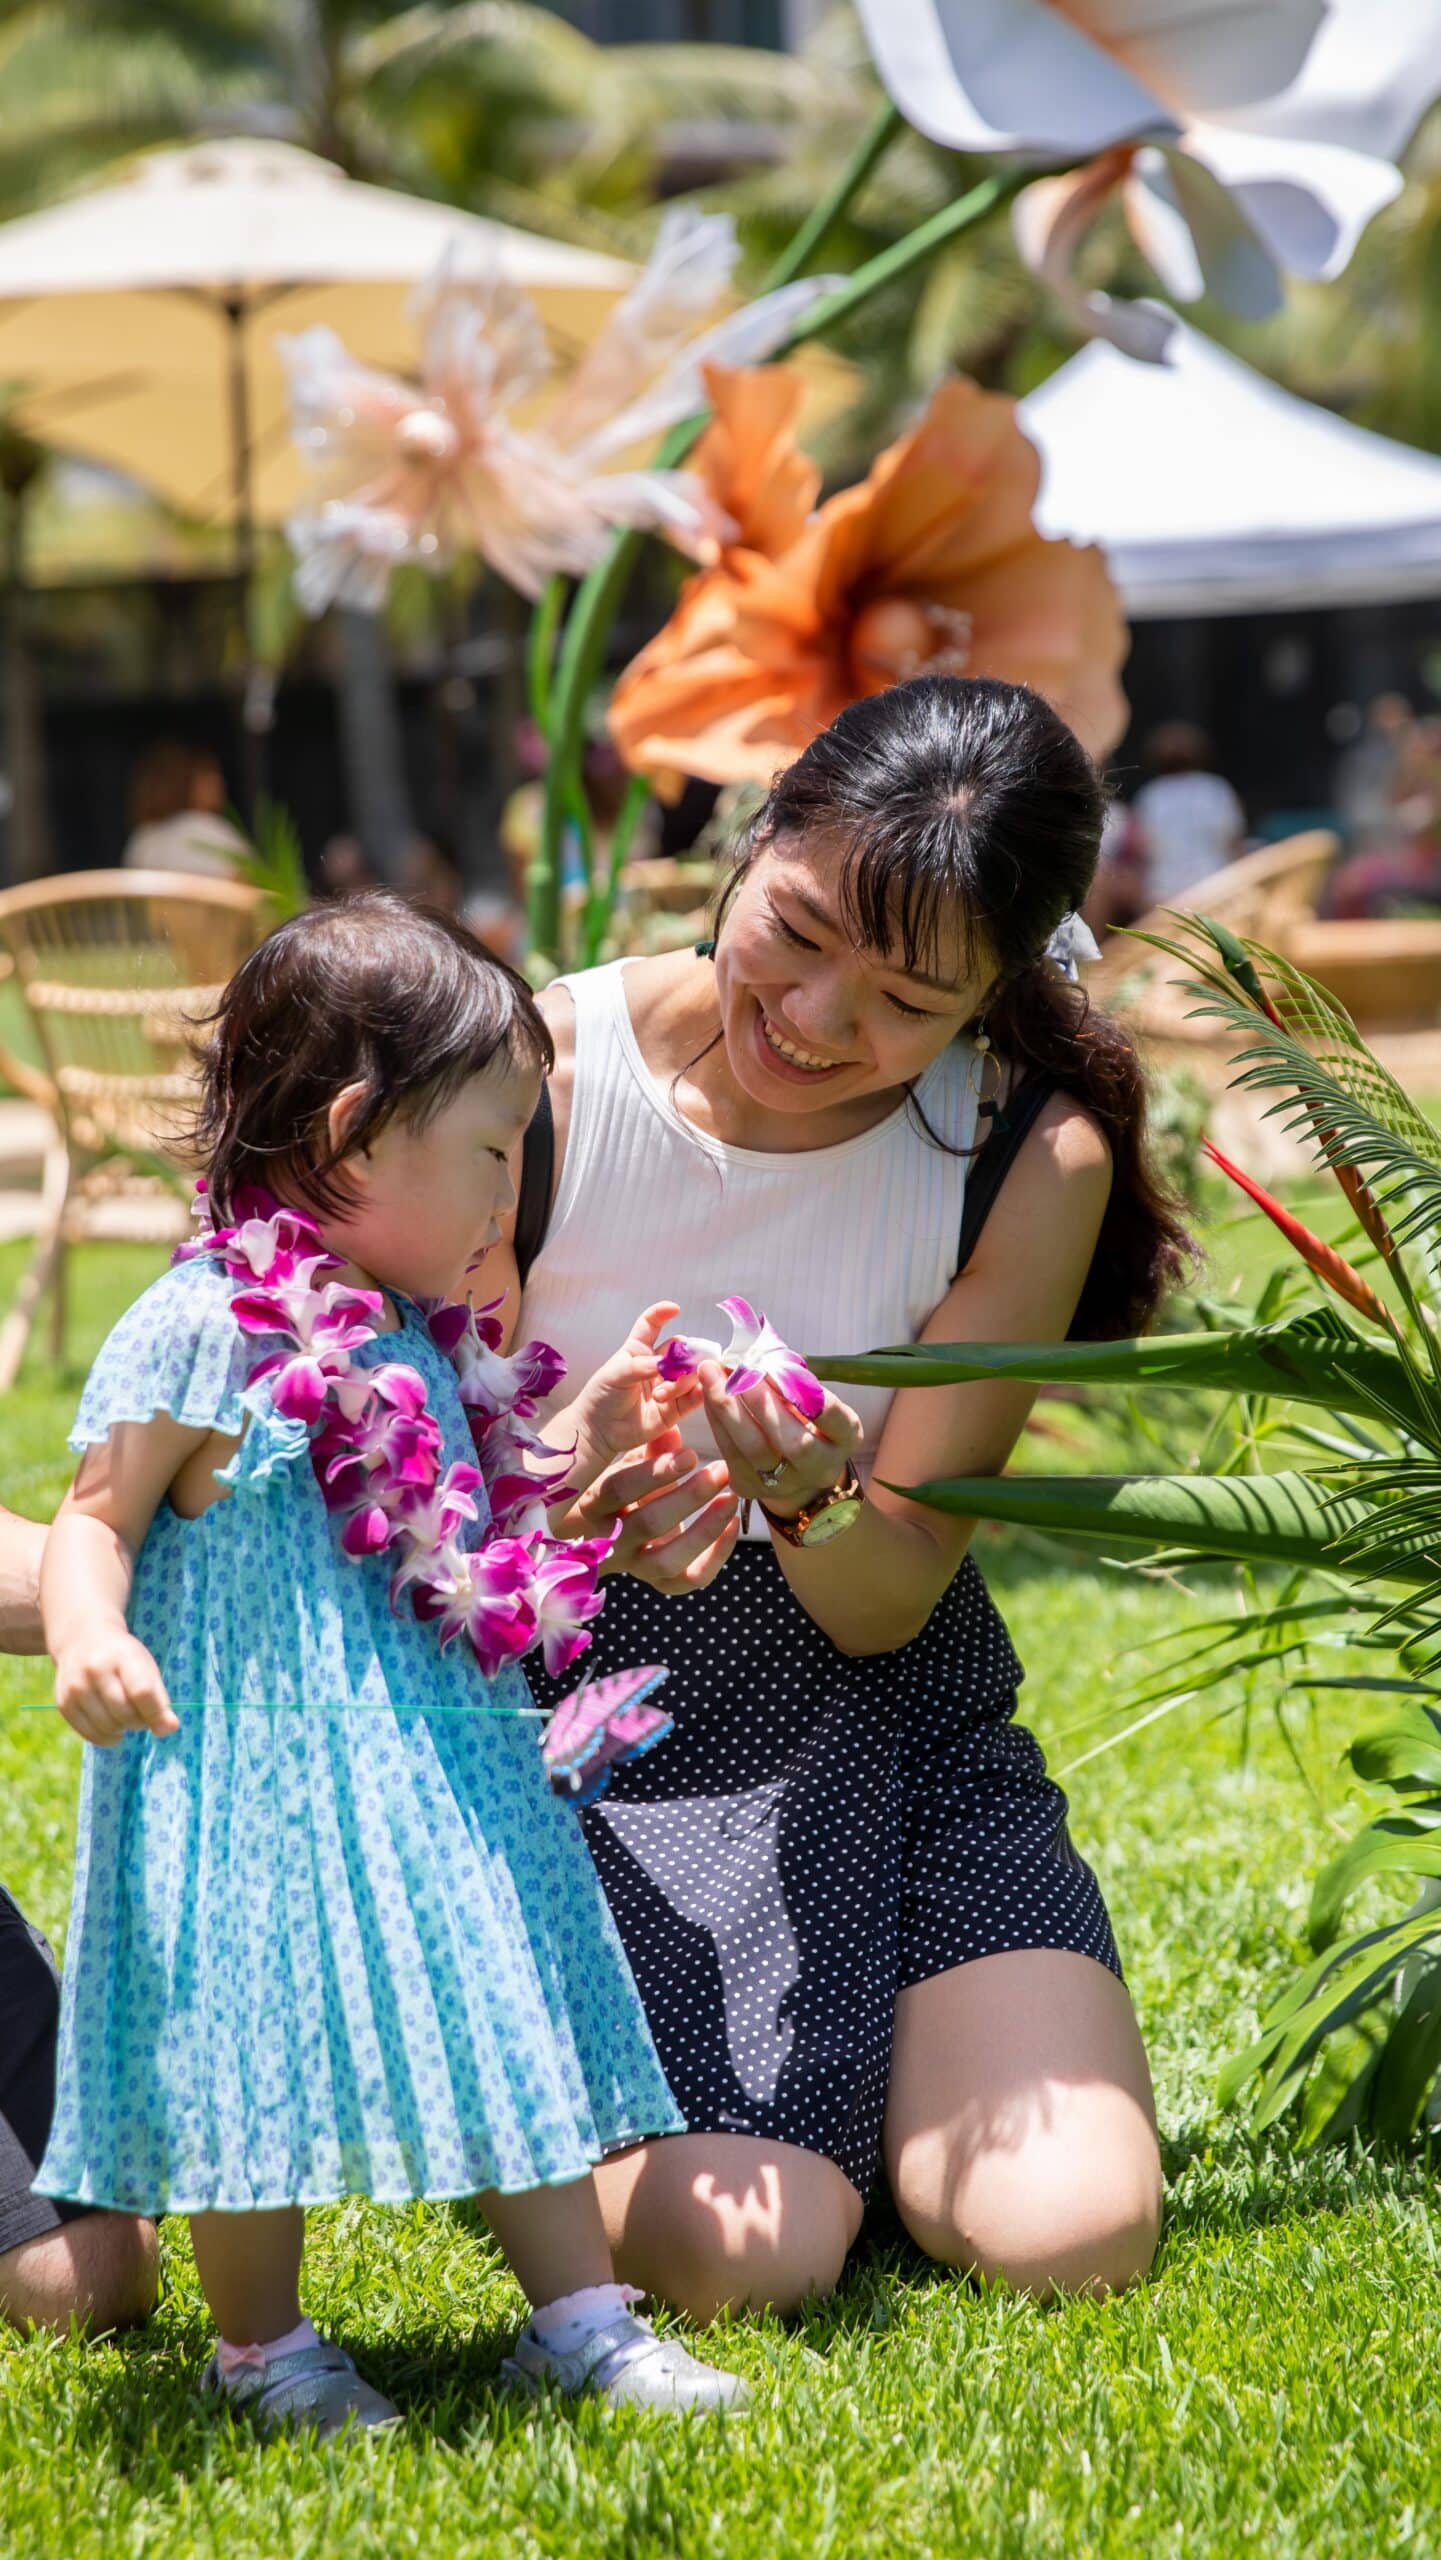 Celebrate our third annual Founder’s Day at Victoria Ward Park on Saturday, June 10 from 10am – 12pm! Join us for an array of educational activities, including the return of our popular interactive butterfly experience, planting activities, lei-making, live calligraphy, and so much more. Learn more at the link in our bio. #wardvillage #honolulu #oahu